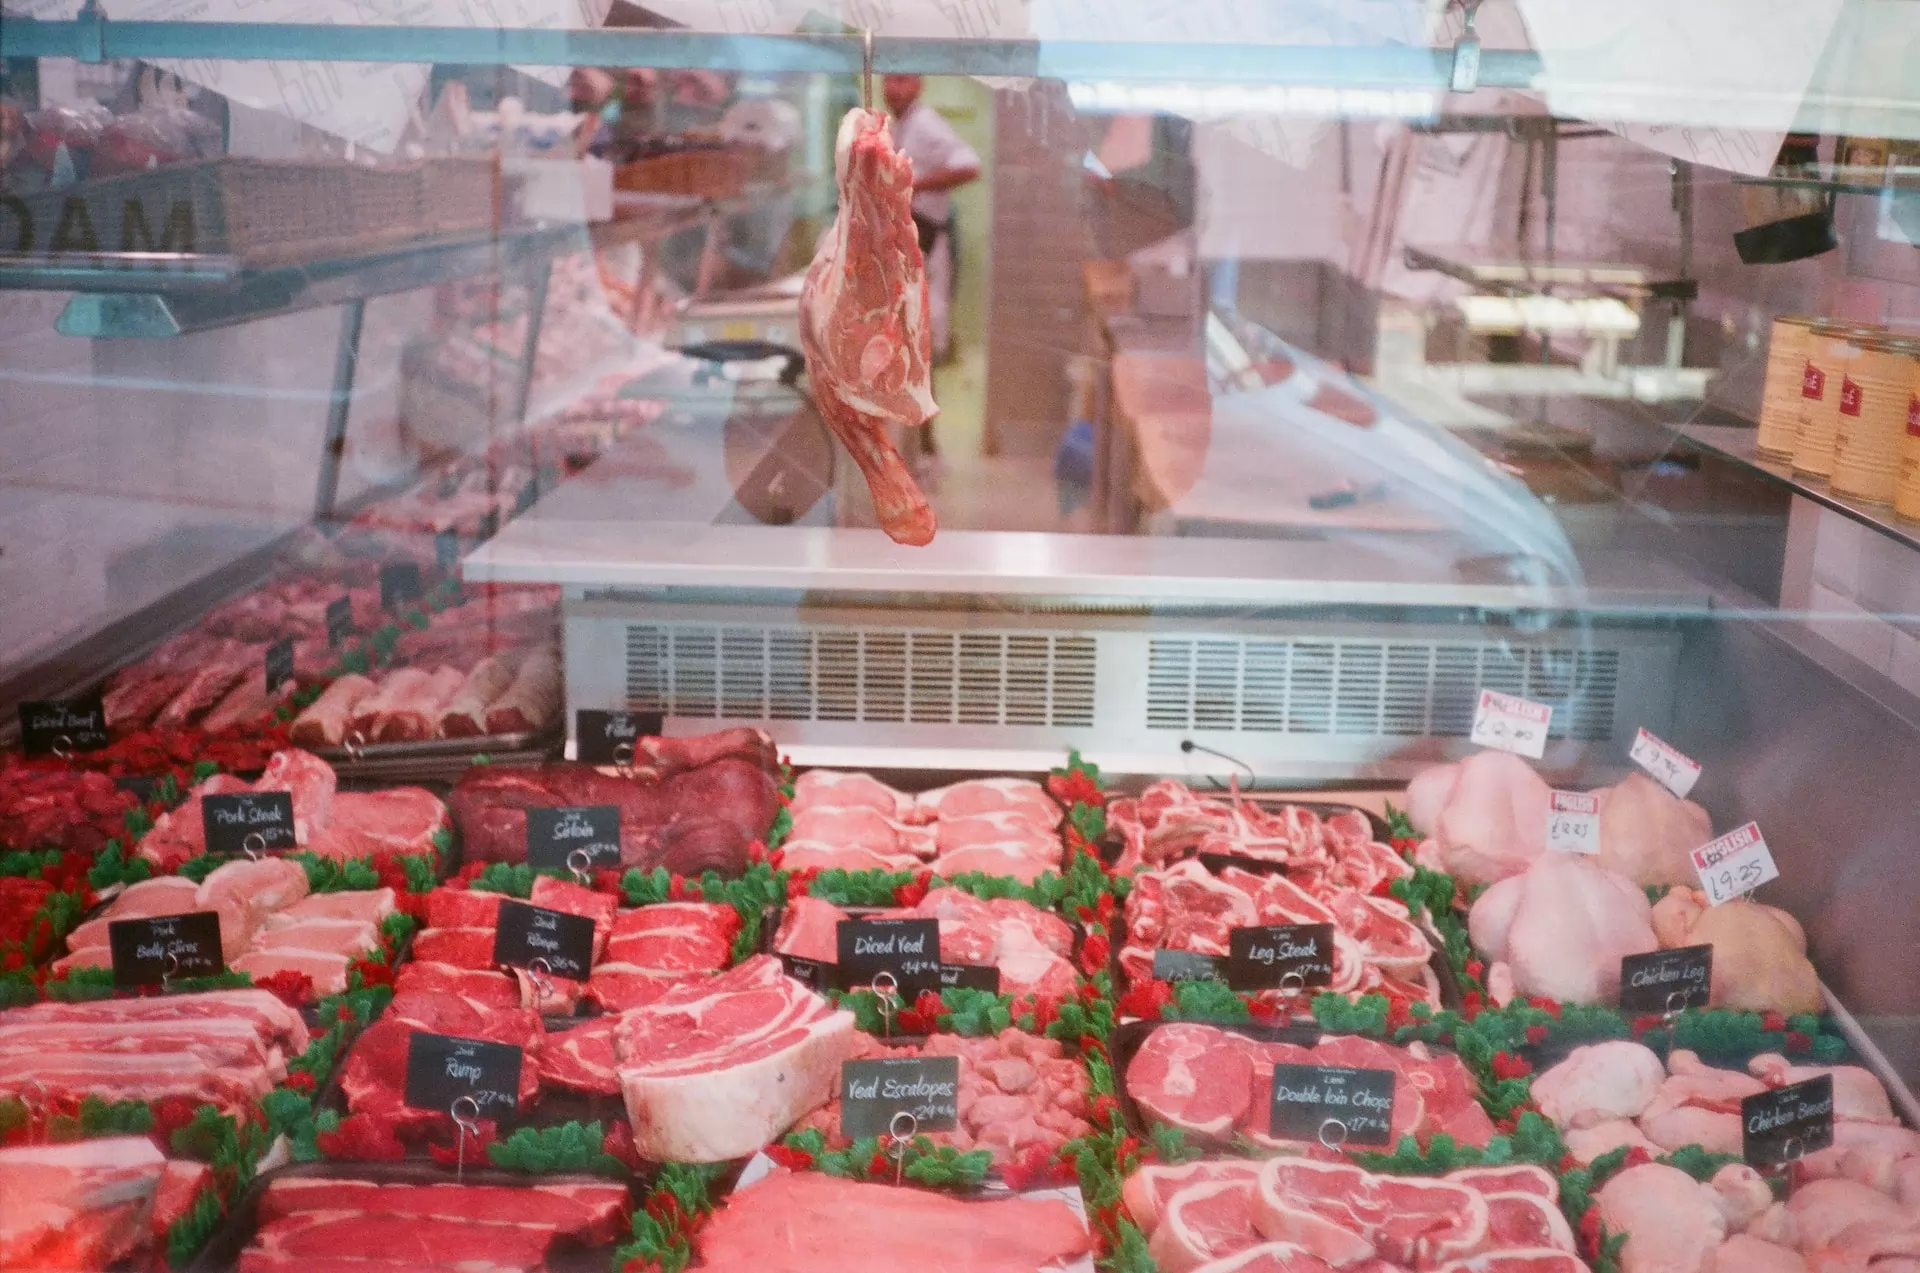 The meat processing and preservation market